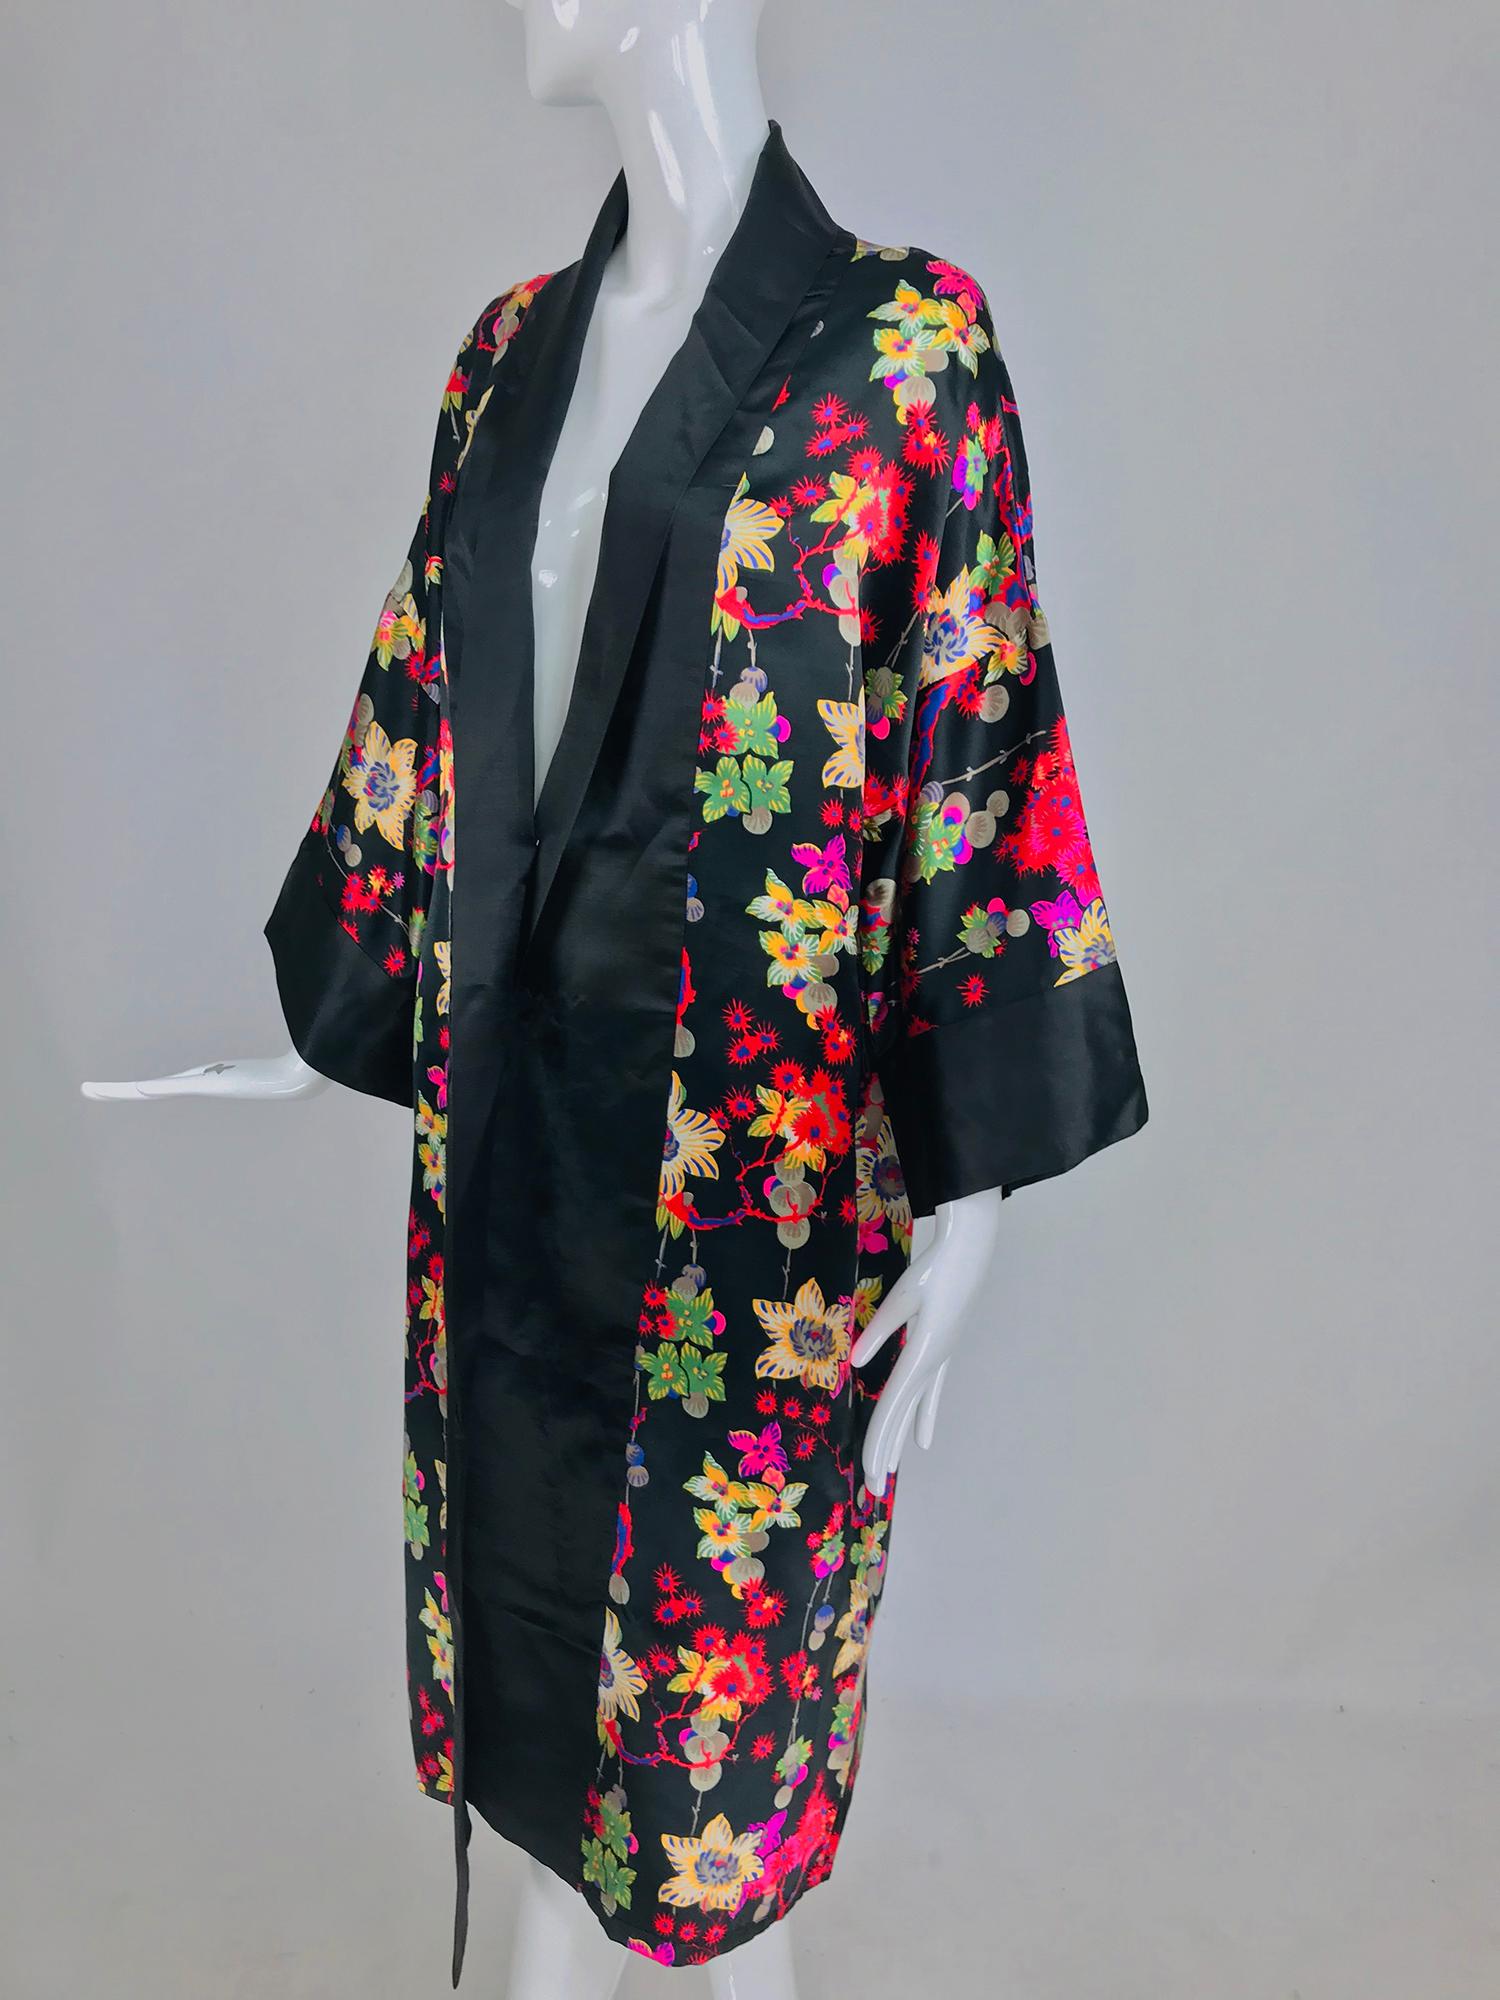 1920s vintage silk kimono robe fantasy floral print. This beautiful robe has the most amazing print, the colours are vivid and pop against the black ground, the flowers are like fireworks and some of them look like they are sprouting little